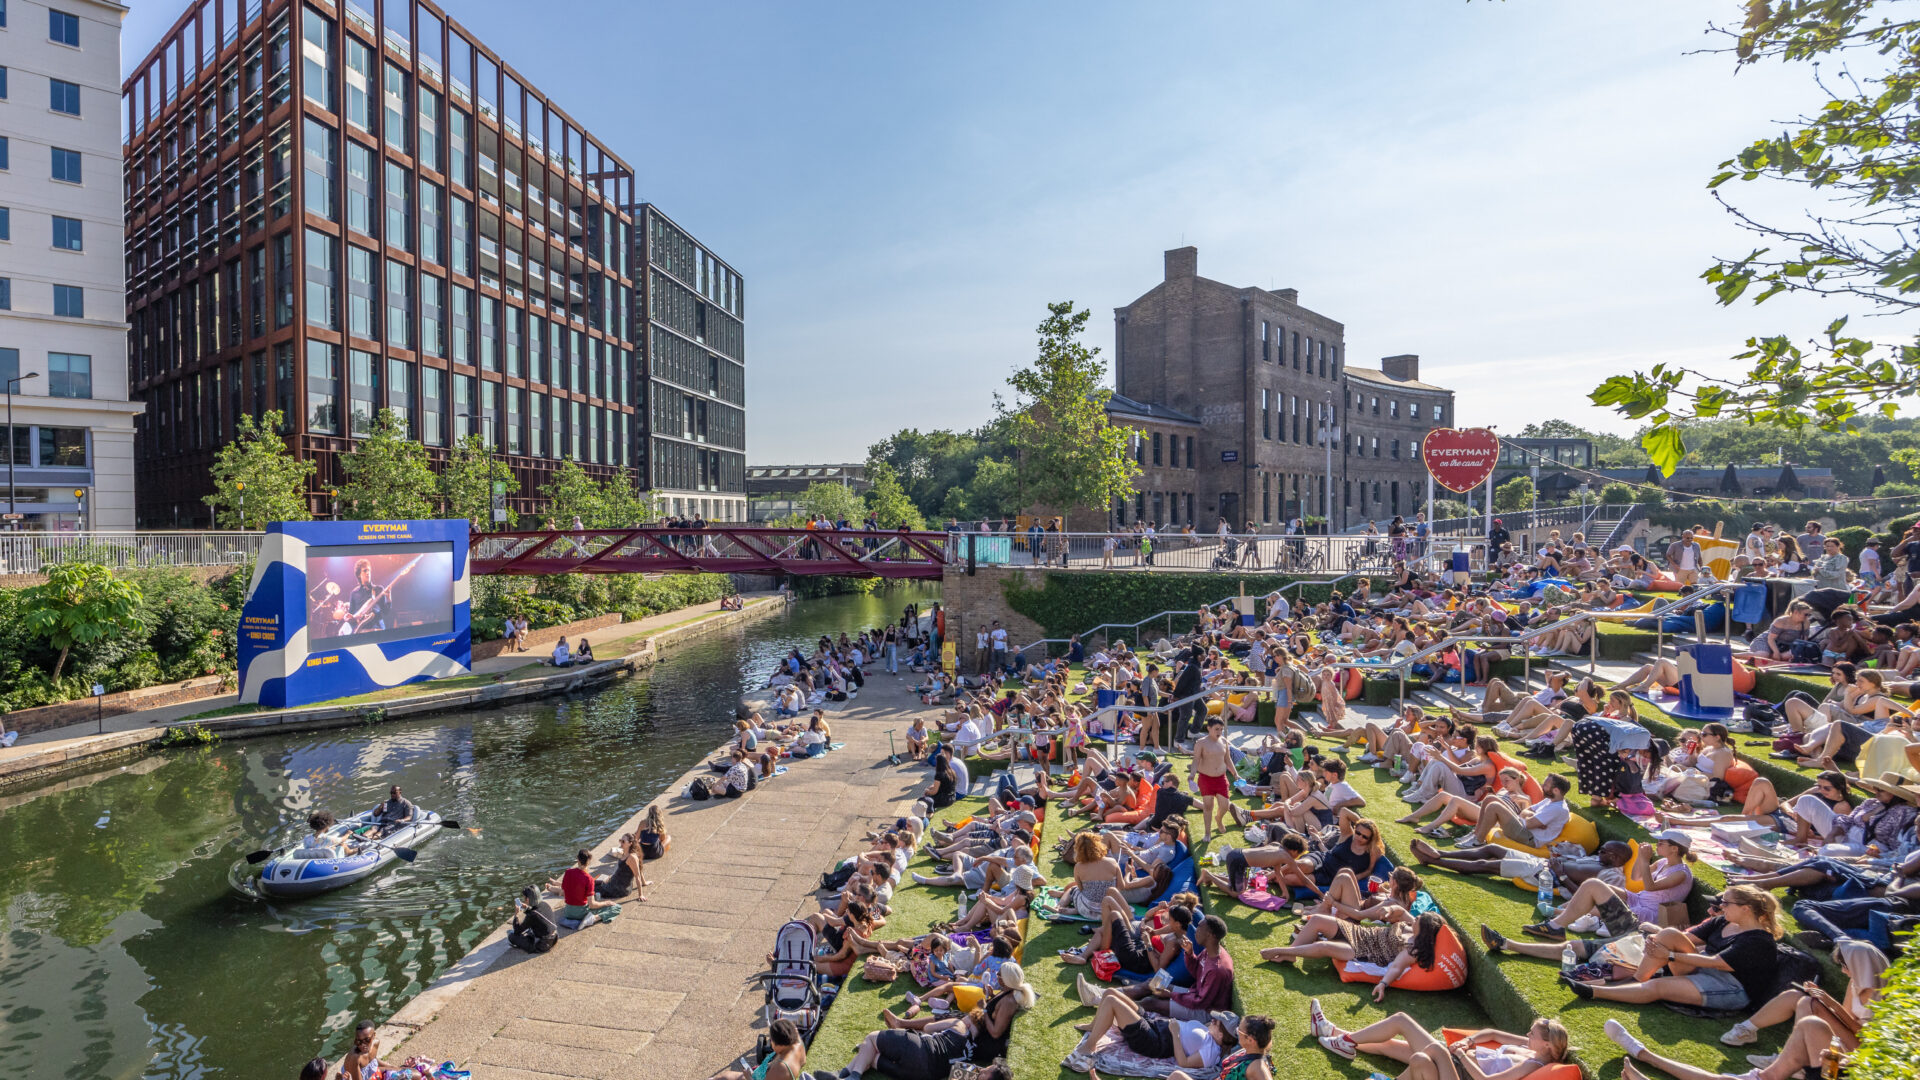 a picture of an open air cinema near kings cross on the river bank. many people are attending